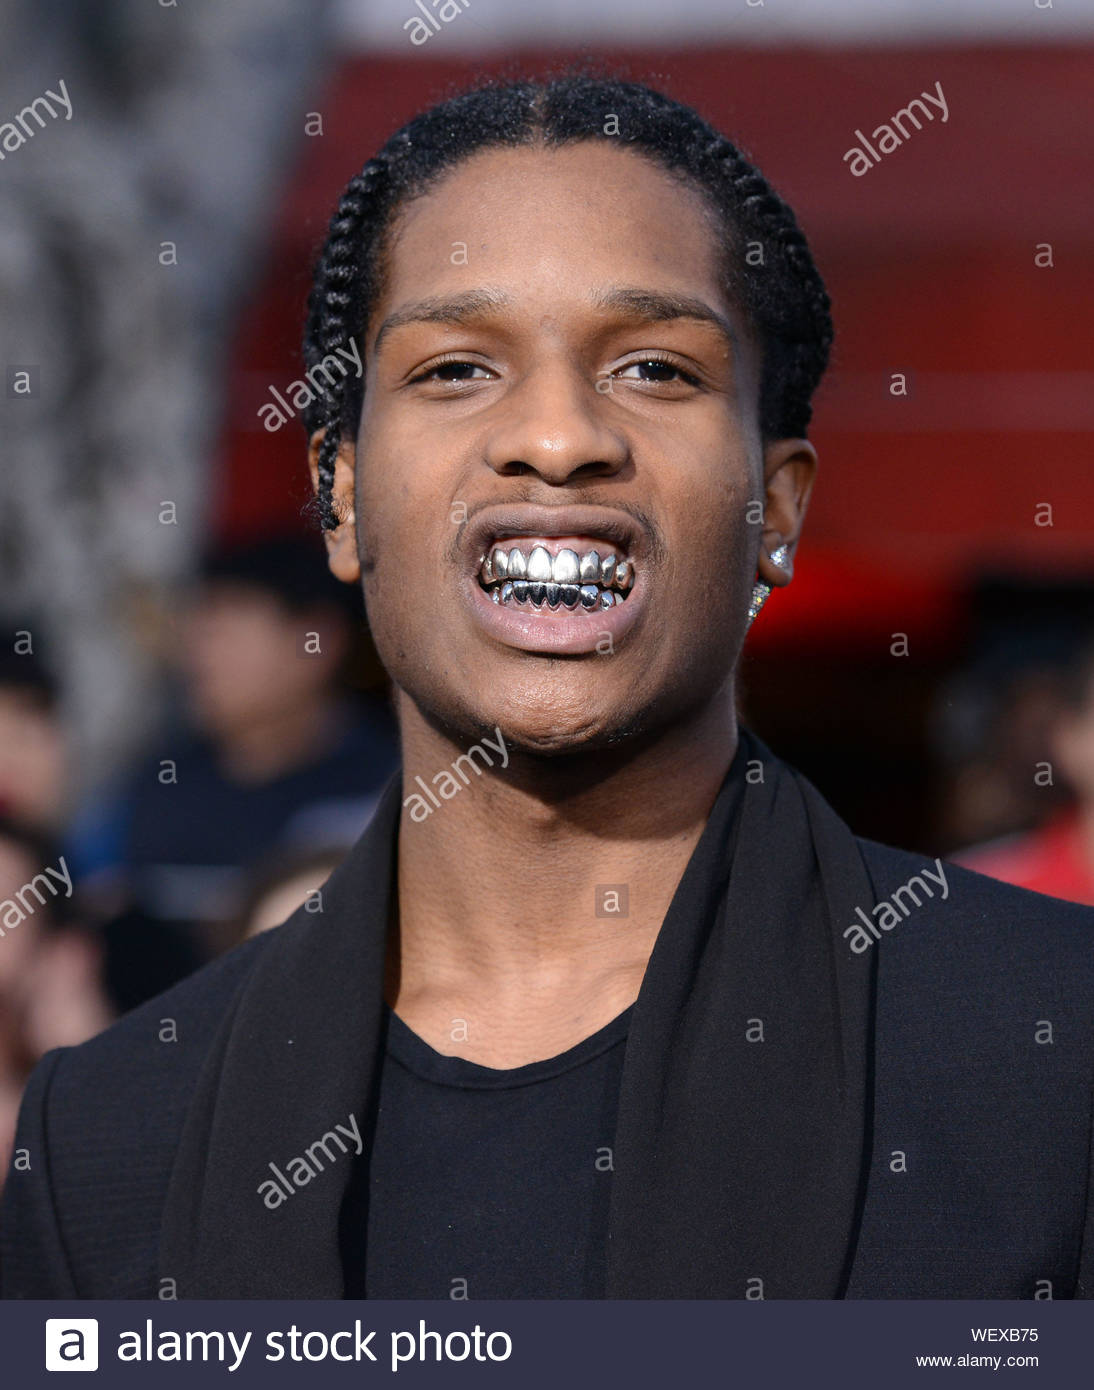 Los Angeles Ca Asap Rocky Attends The Divergent Premiere Held At Regency Bruin Theatre In Los Angeles Akm Gsi March 18 2014 Stock Photo Alamy